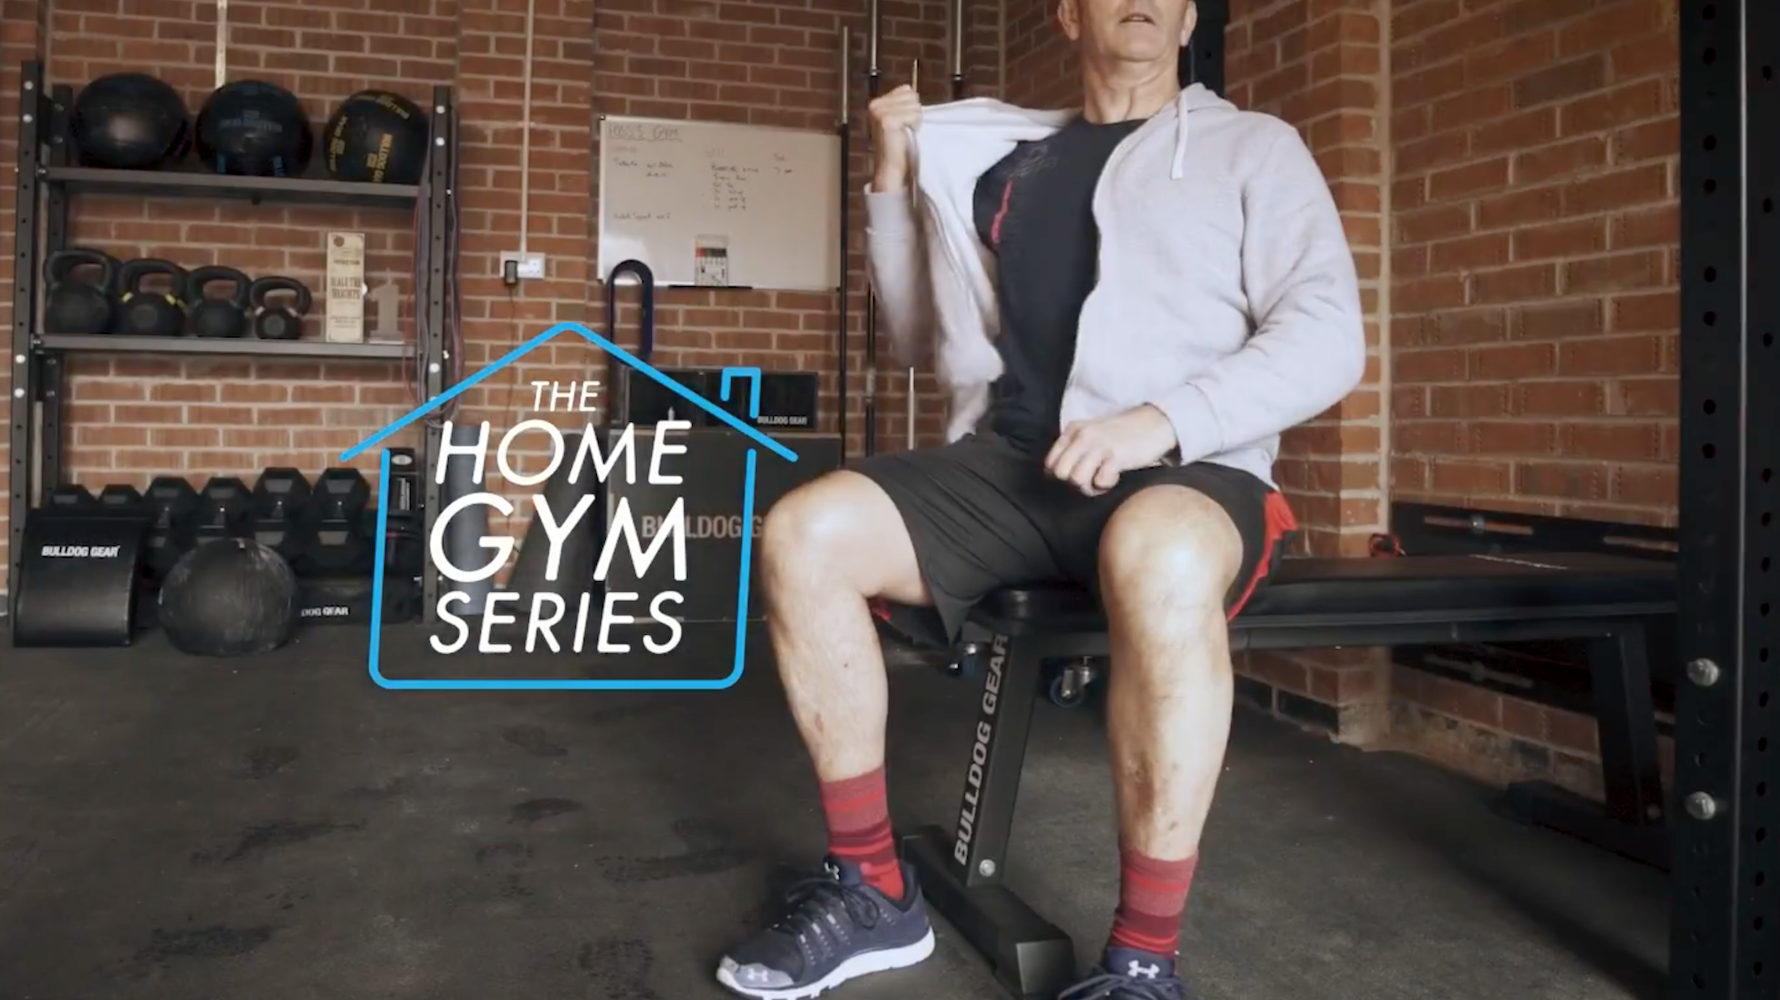 THE HOME GYM SERIES: Building For a Family